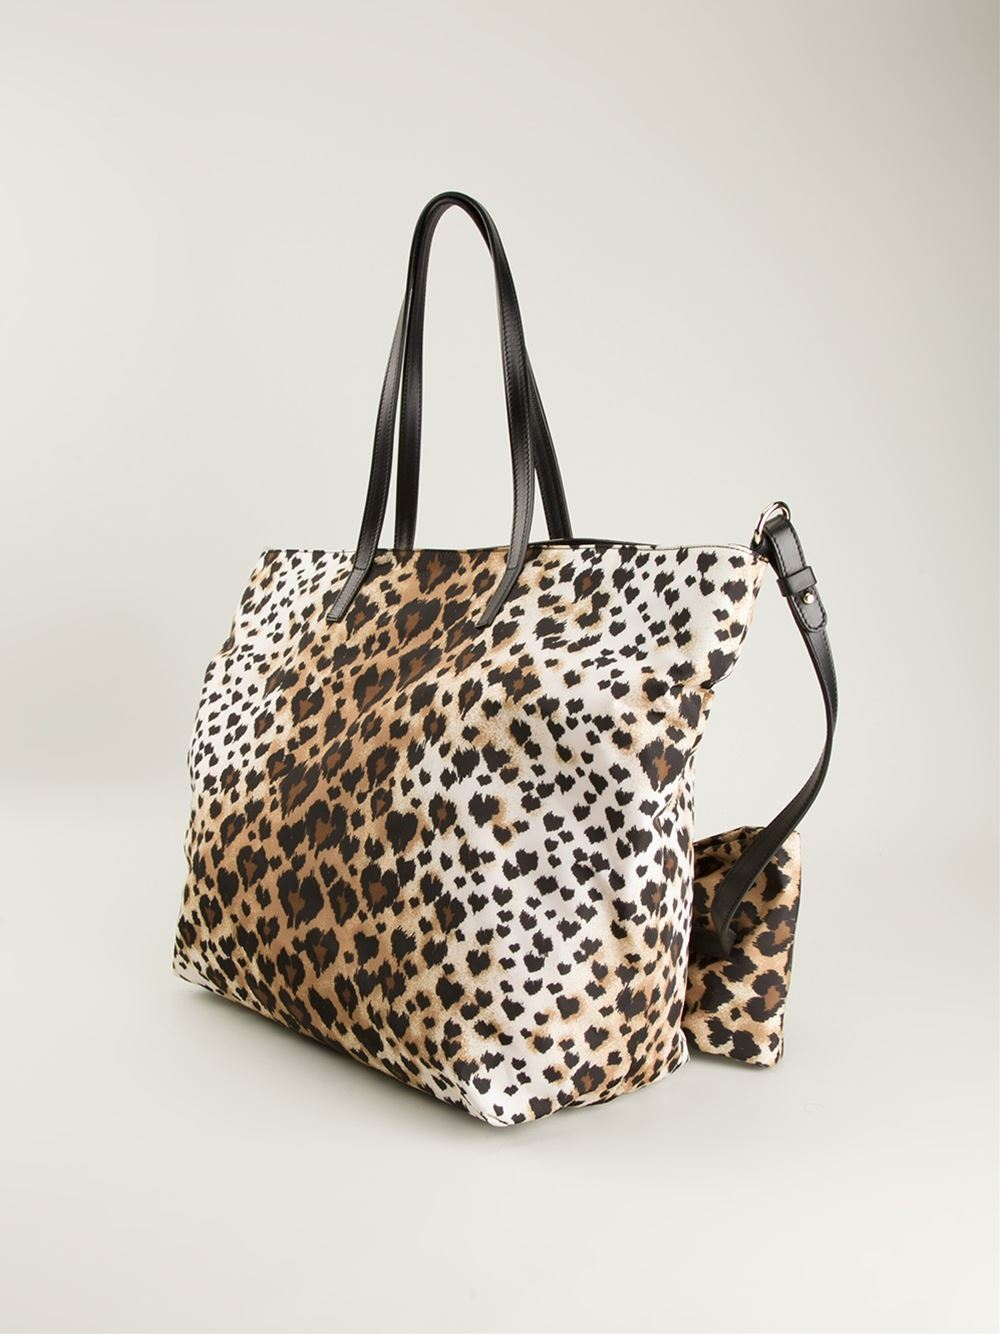 RED Valentino Leopard Print Tote Bag  in Natural Lyst